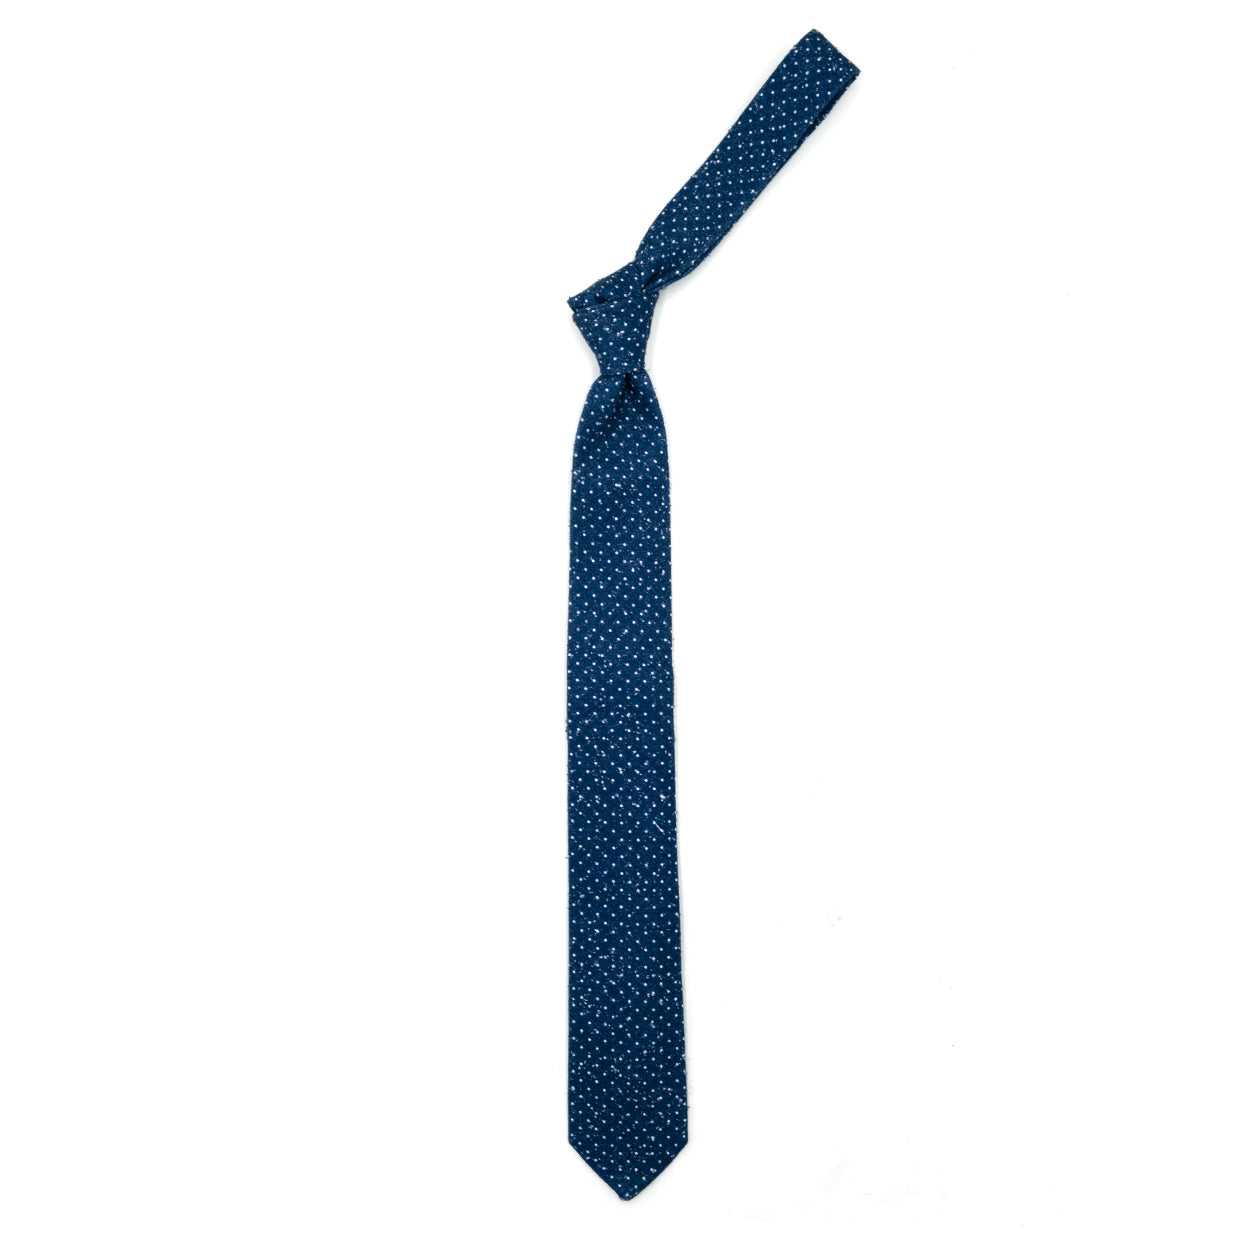 Blue tie with white dots